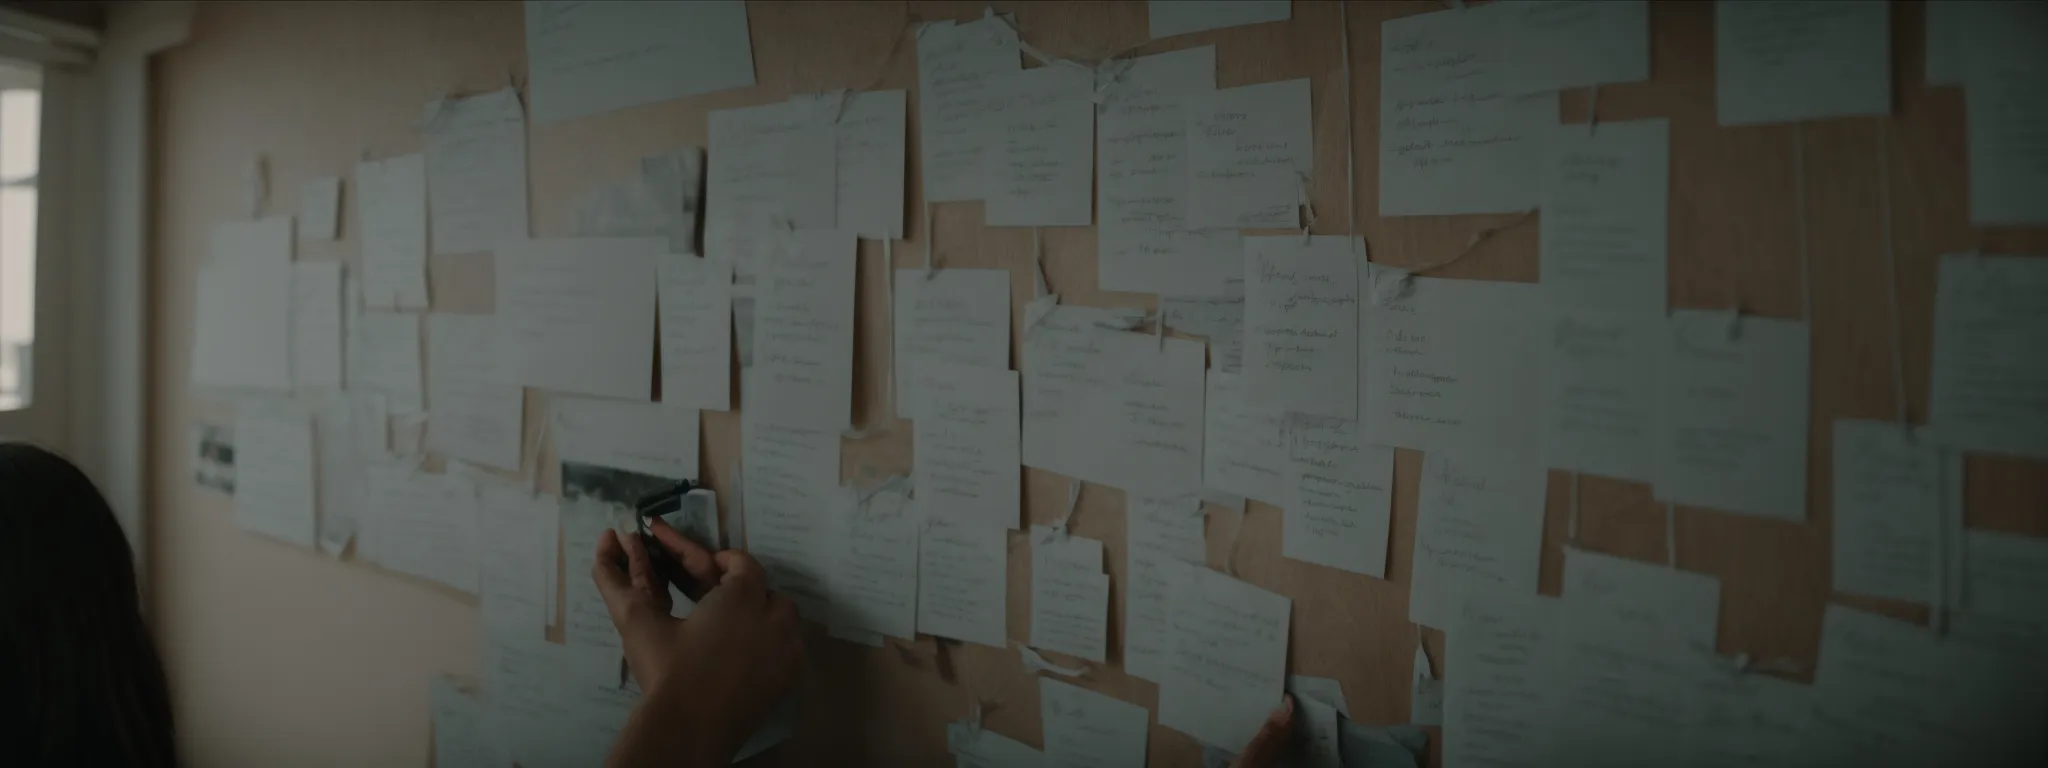 a person thoughtfully arranging topic cards on a wall, symbolizing seo content planning.